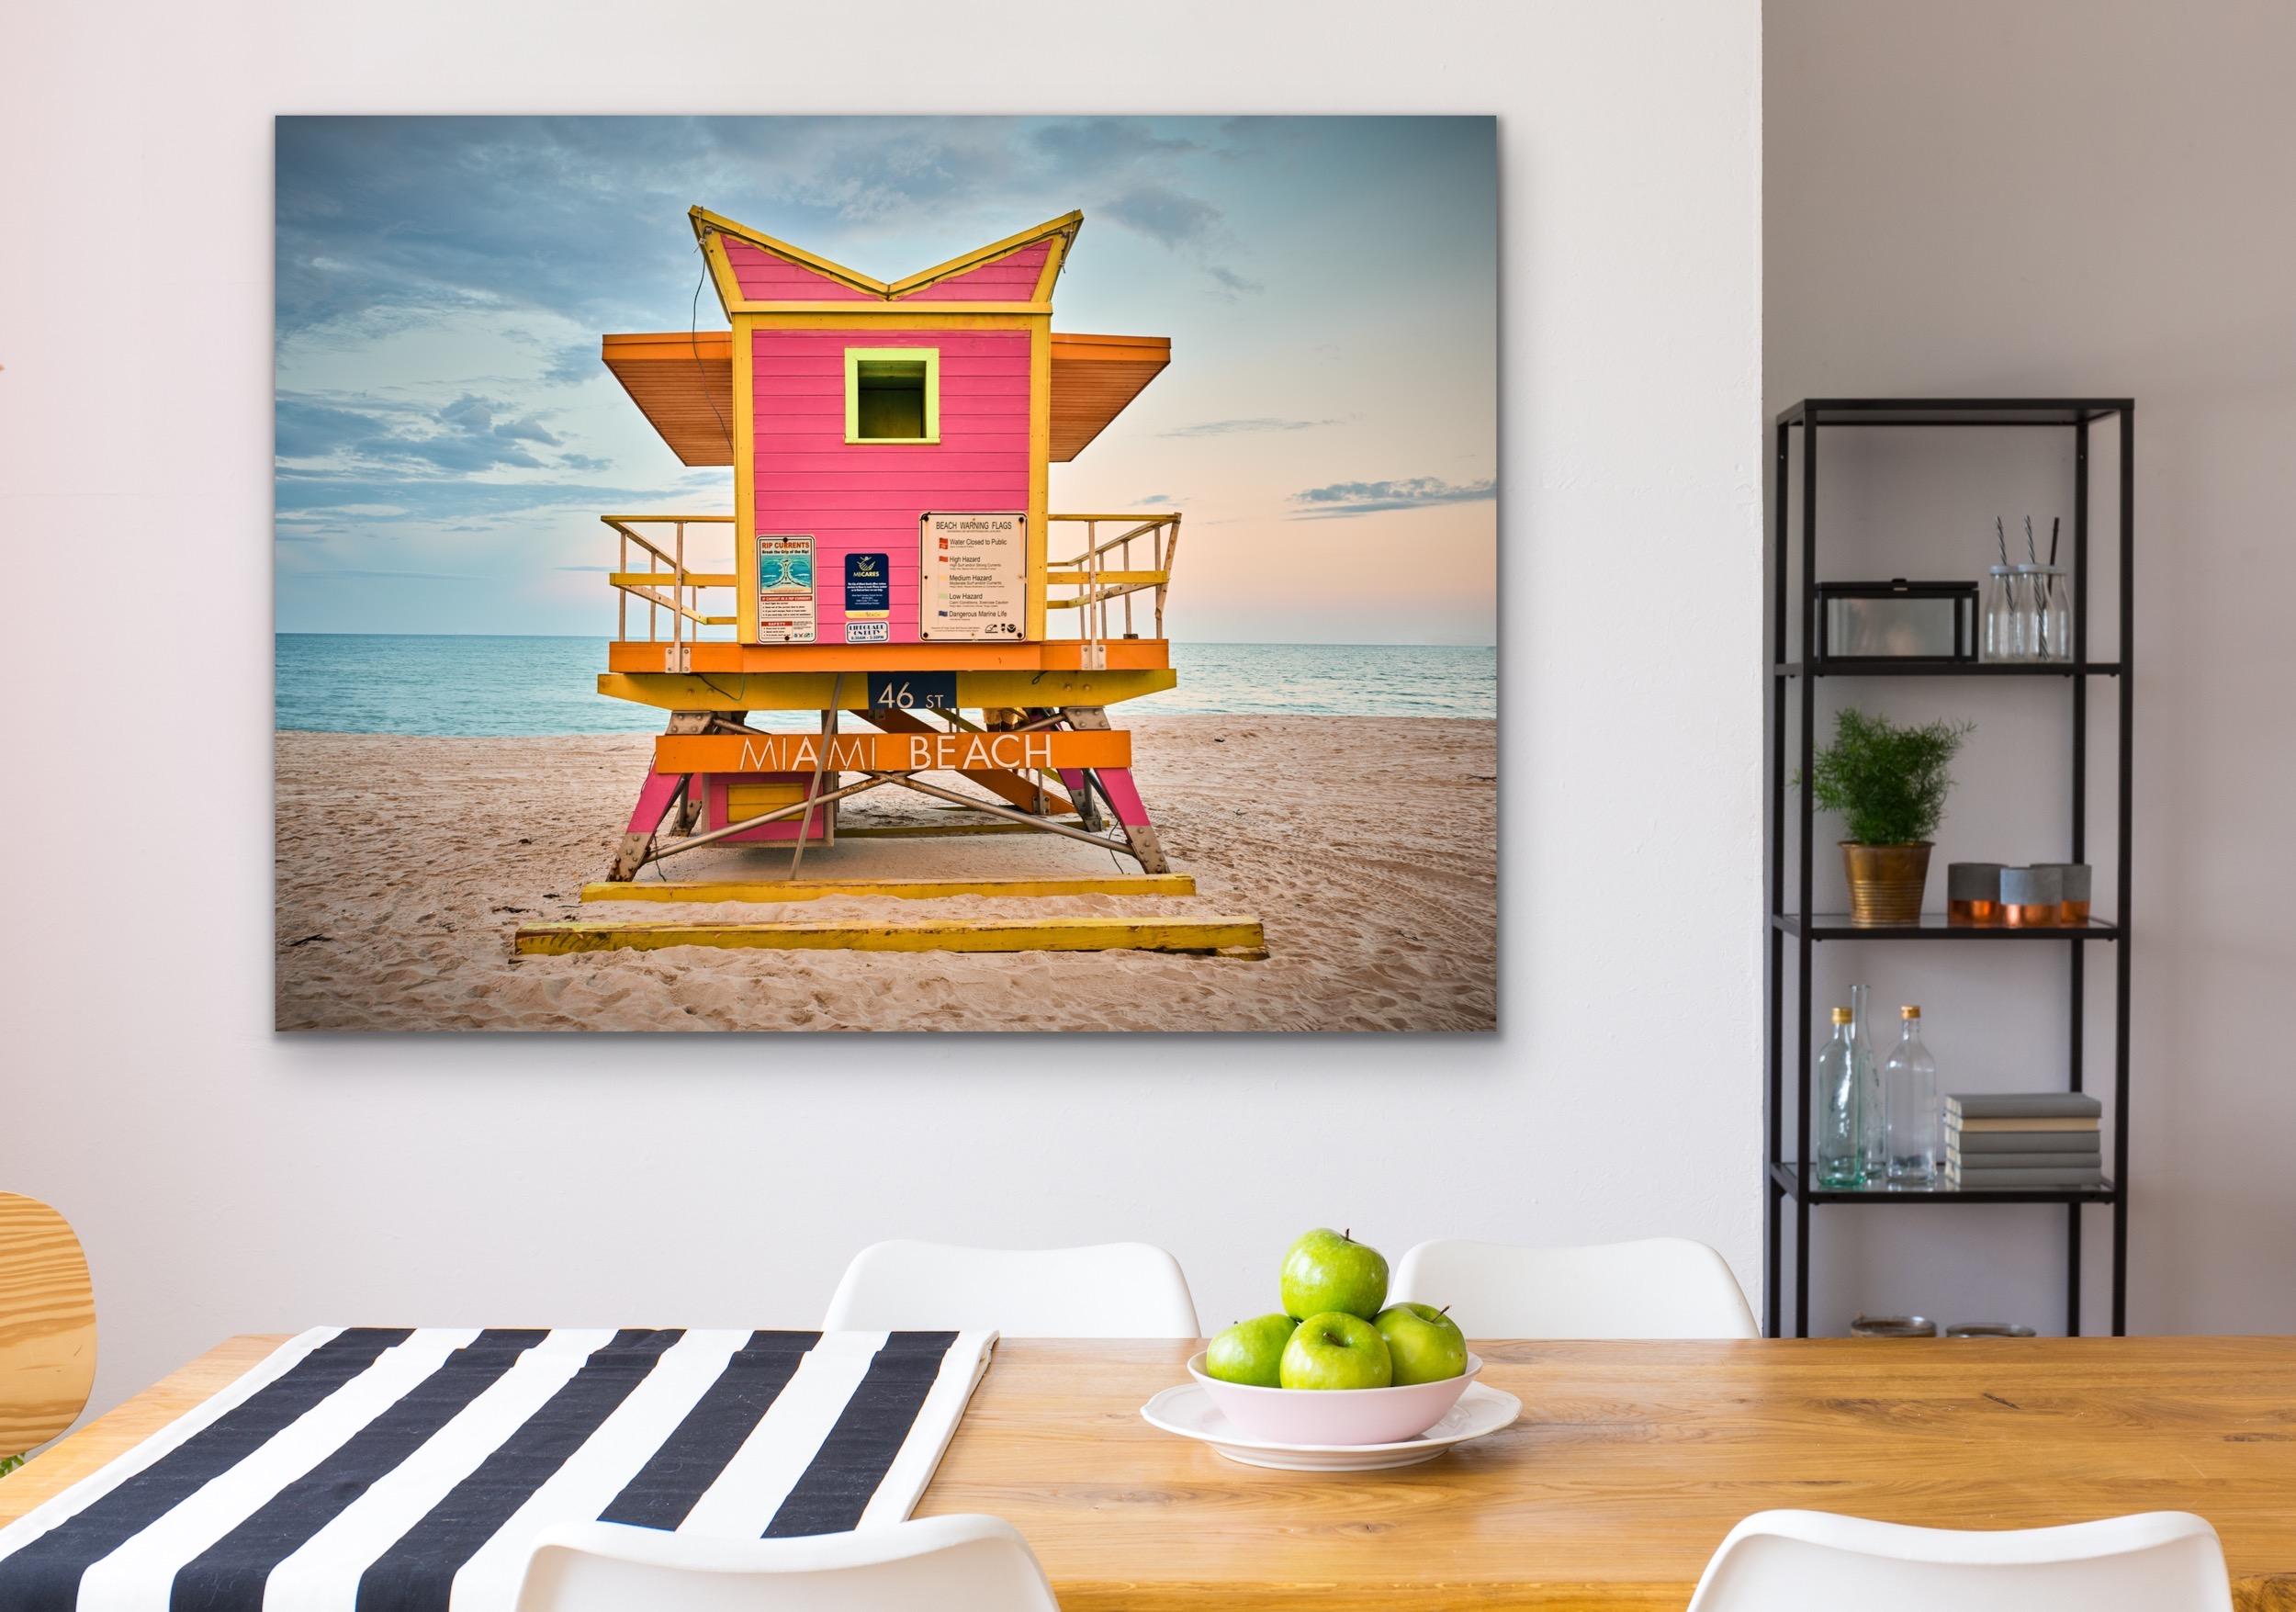 This contemporary coastal photograph by Peter Mendelson features a warm, subtle palette. It captures one of the famously unique lifeguard stands of Miami Beach, Florida, with magenta panelling and yellow and orange trim. The lifeguard stand